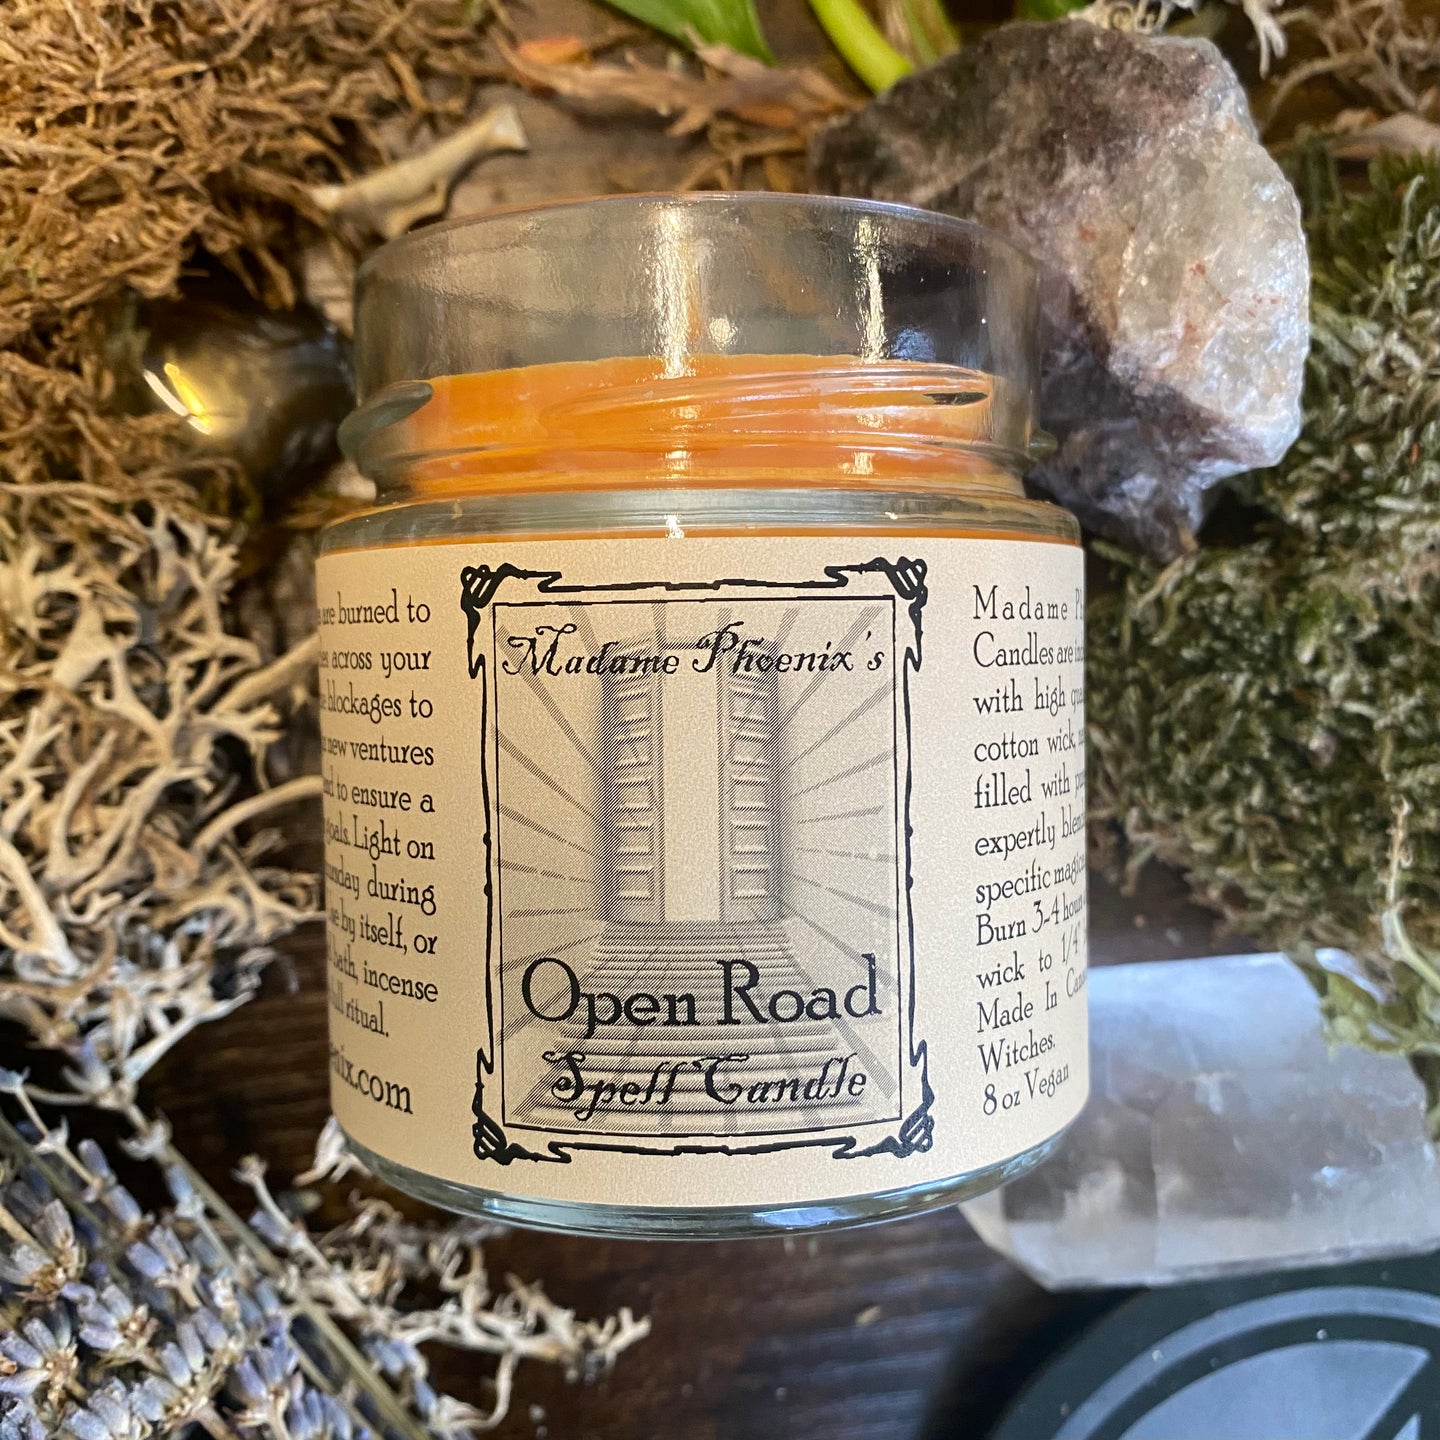 Open Road Magical Spell Candle